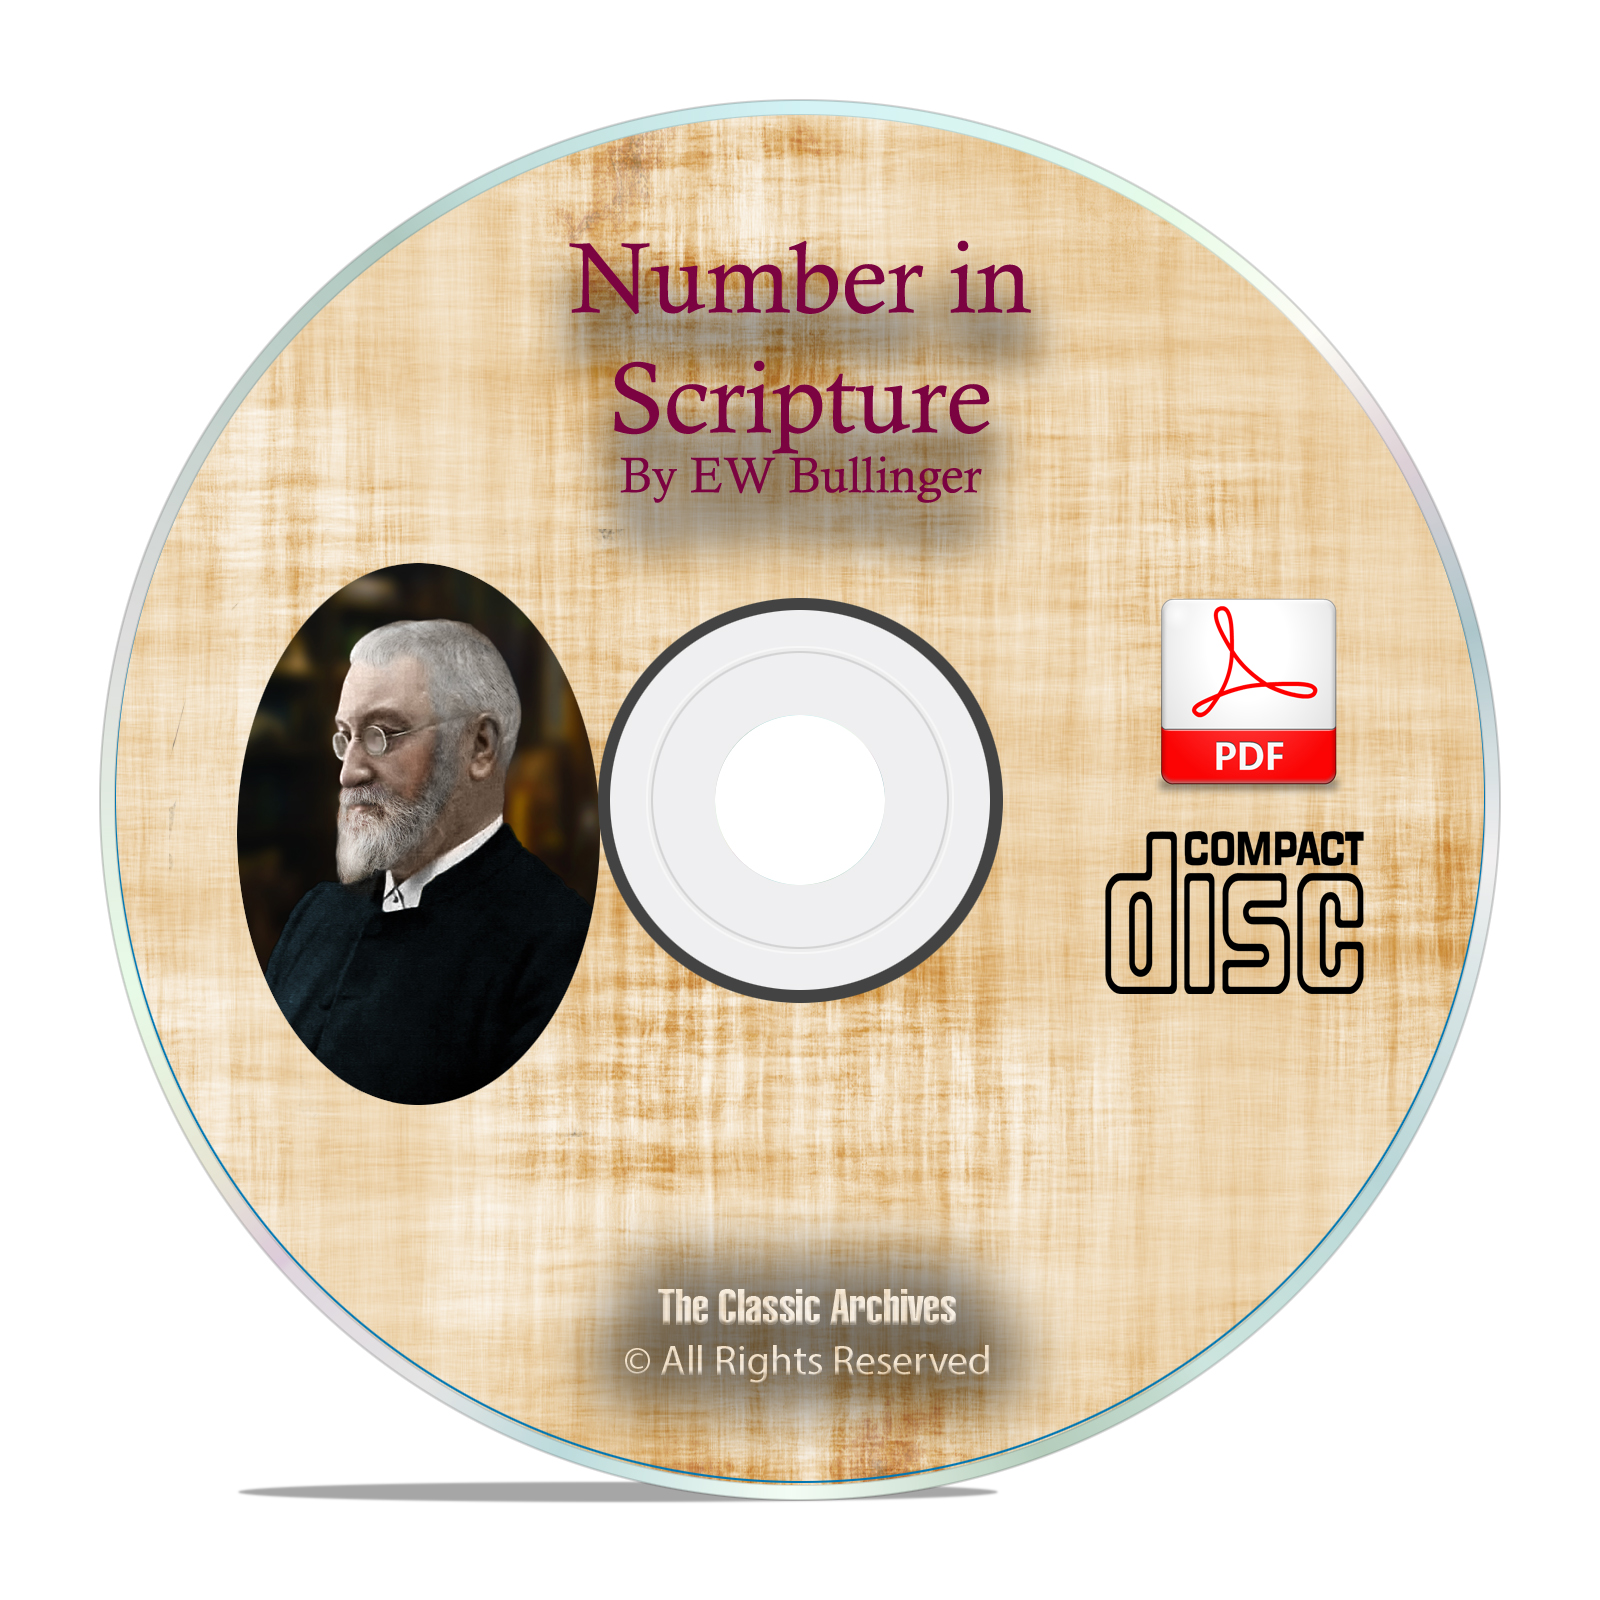 Number in Scripture, by E W Bullinger, Bible Commentary Christian PDF CD